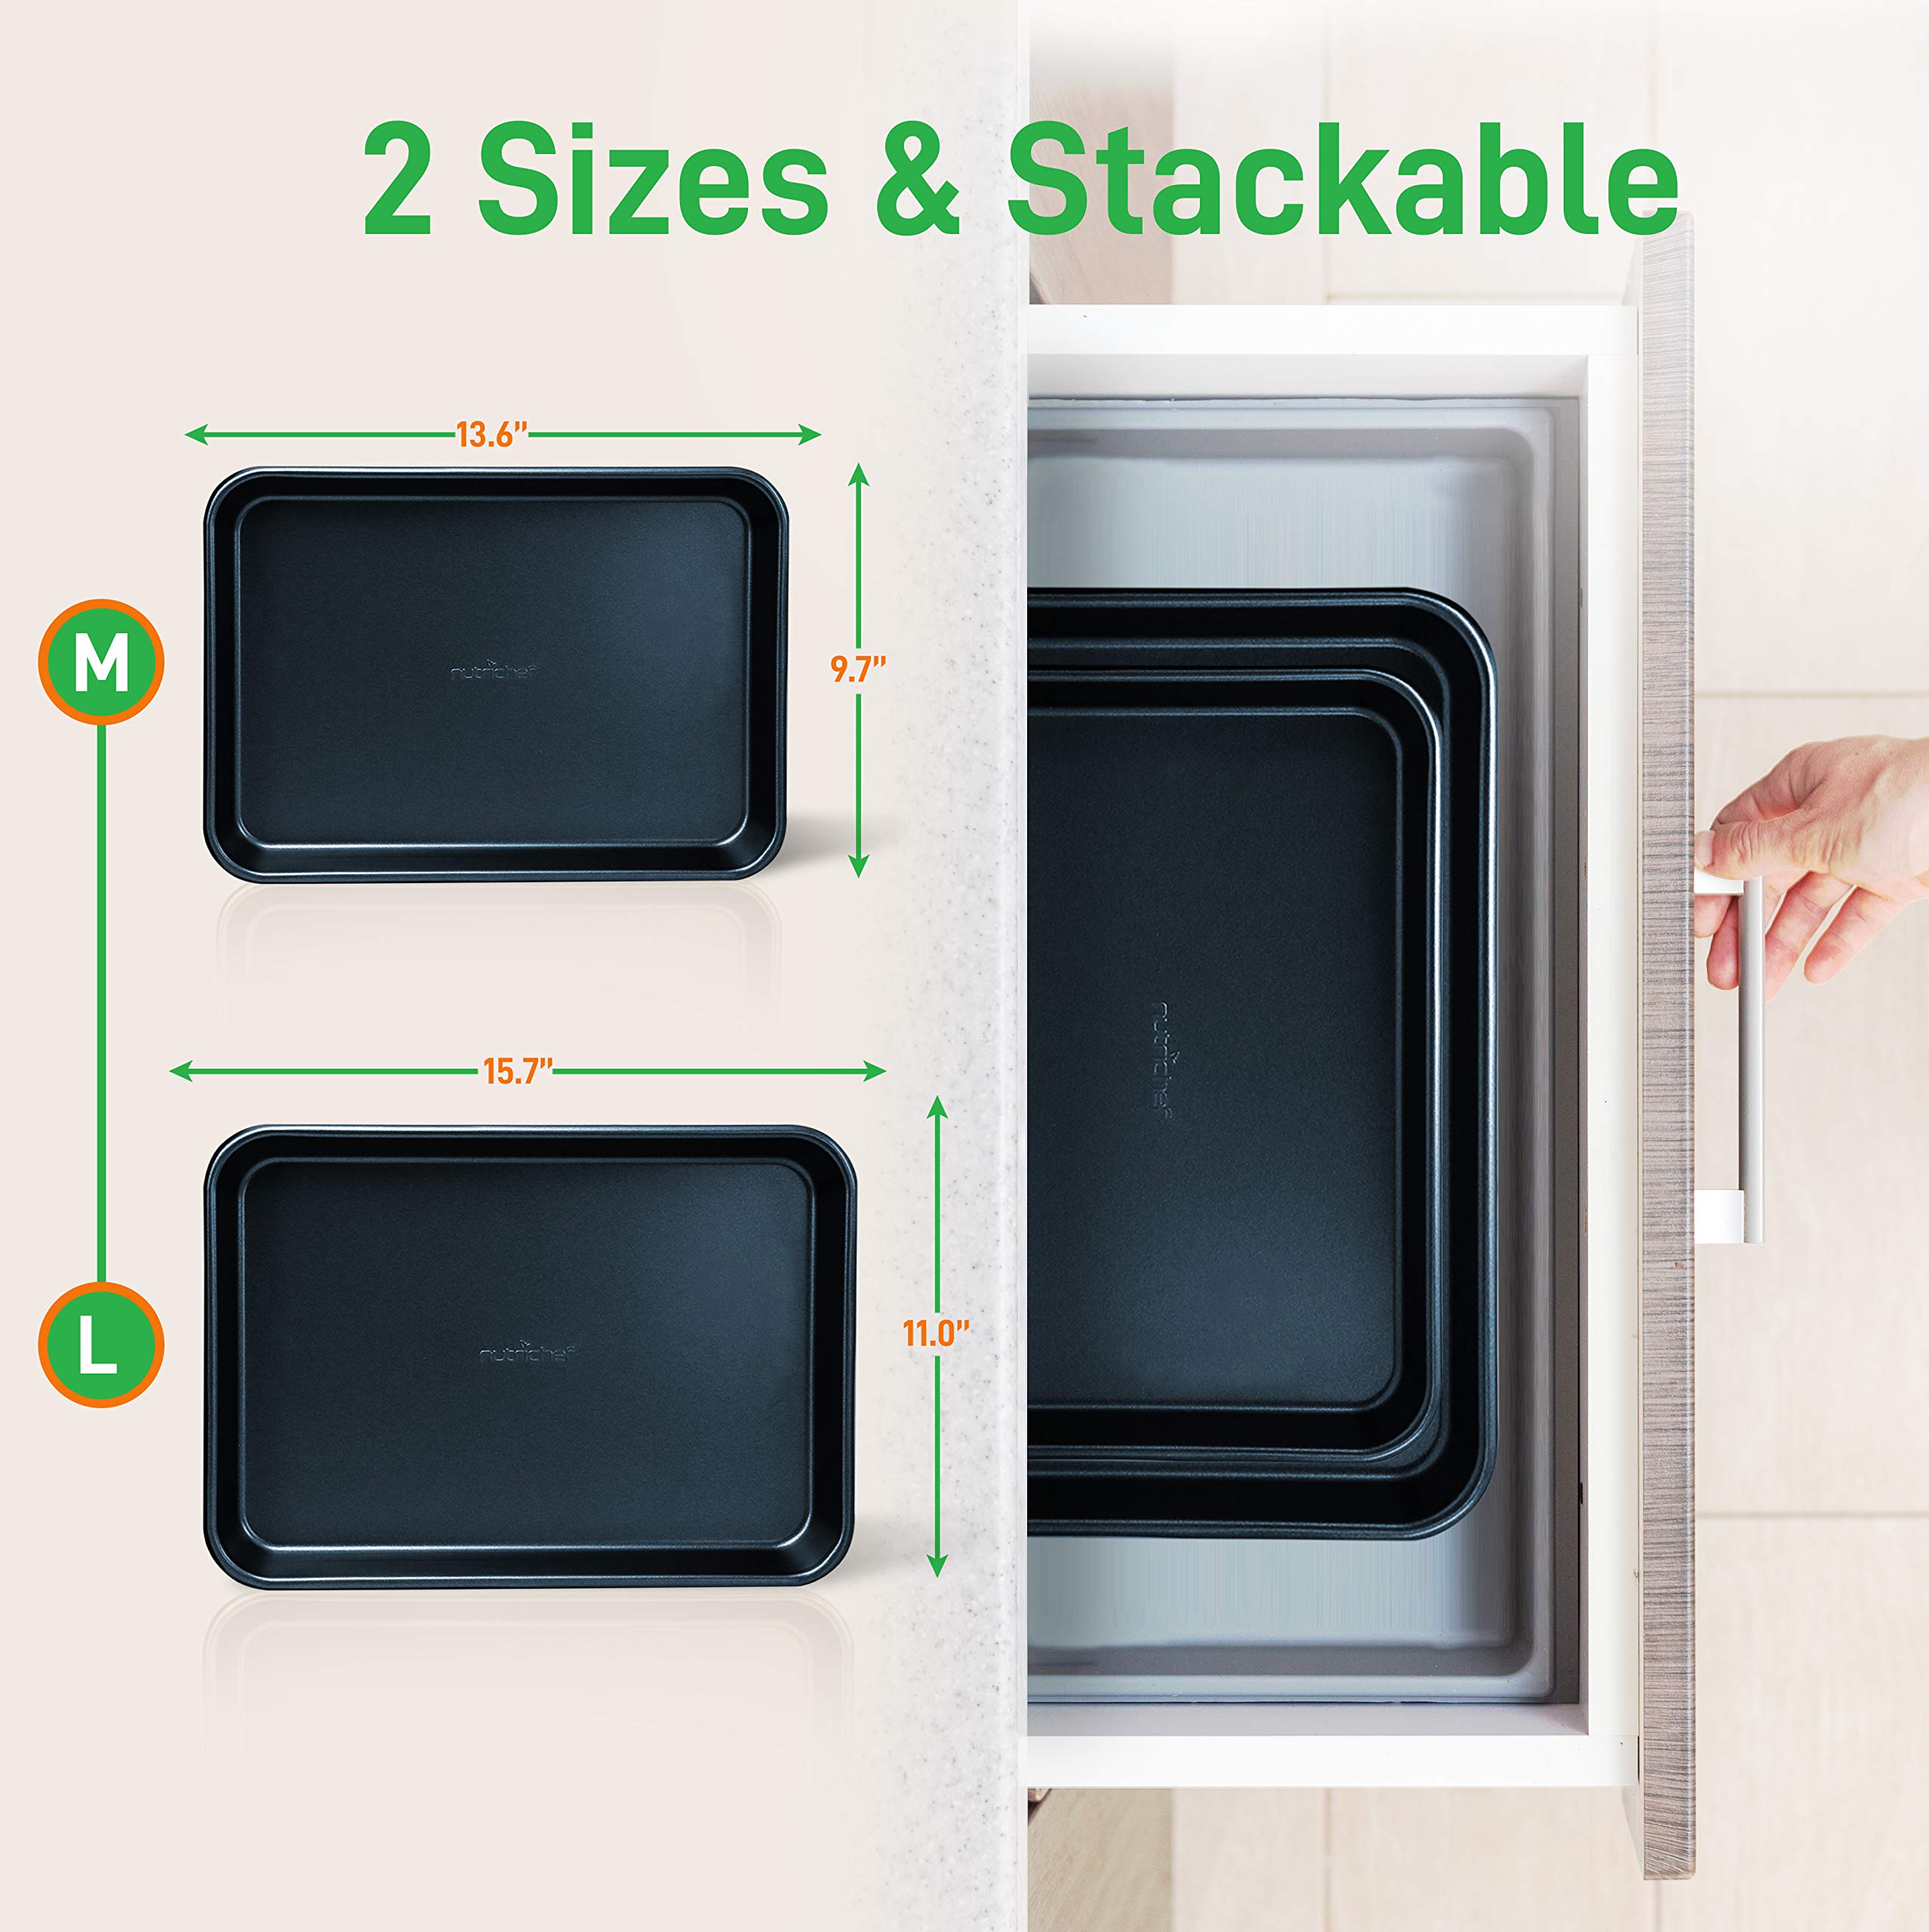 NutriChef Non-Stick Cookie Sheet Baking Pans - 2-Pc. Professional Quality Kitchen Cooking Non-Stick Bake Trays w/ Blue Diamond Coating Inside & Outside, Dishwasher Safe - NutriChef, One Size